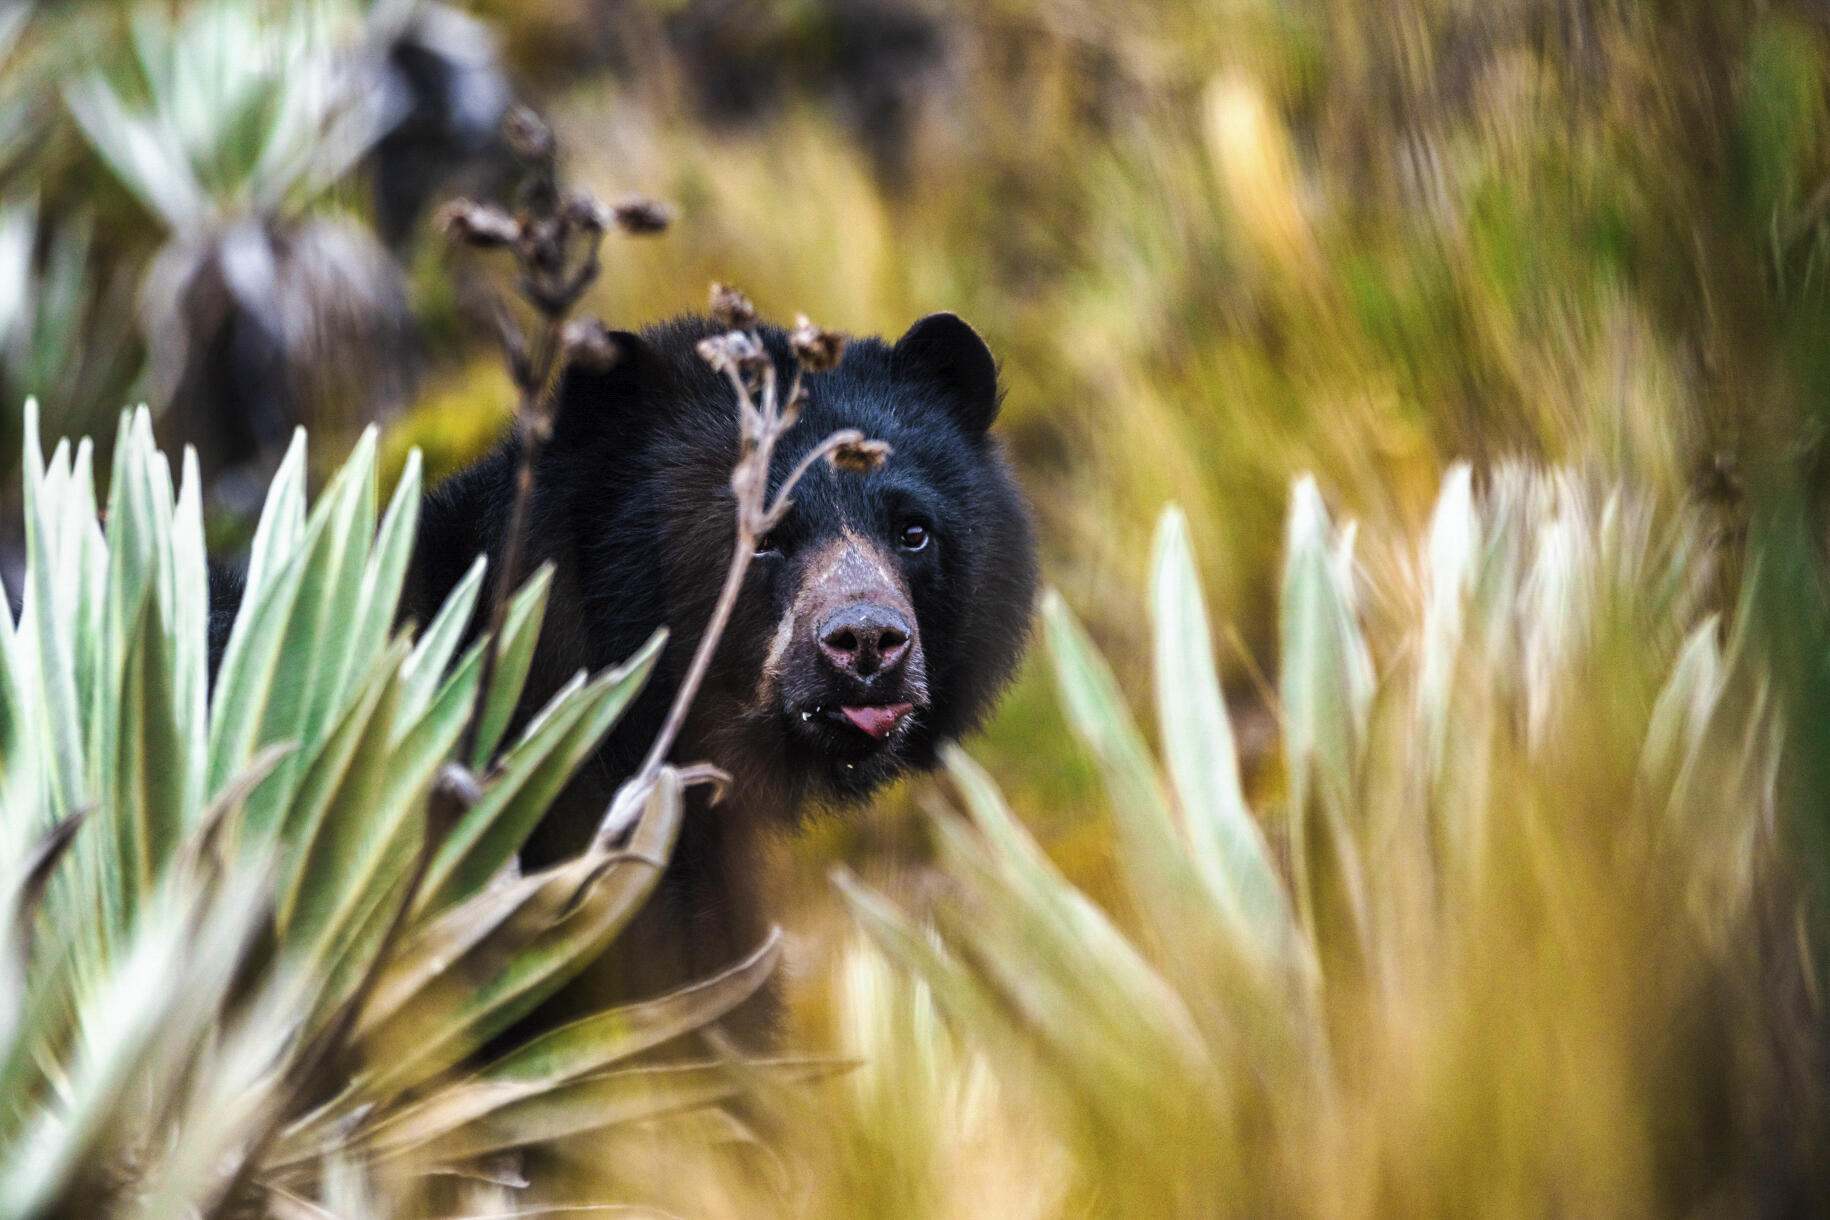 a bear peaking out from behind vegetation